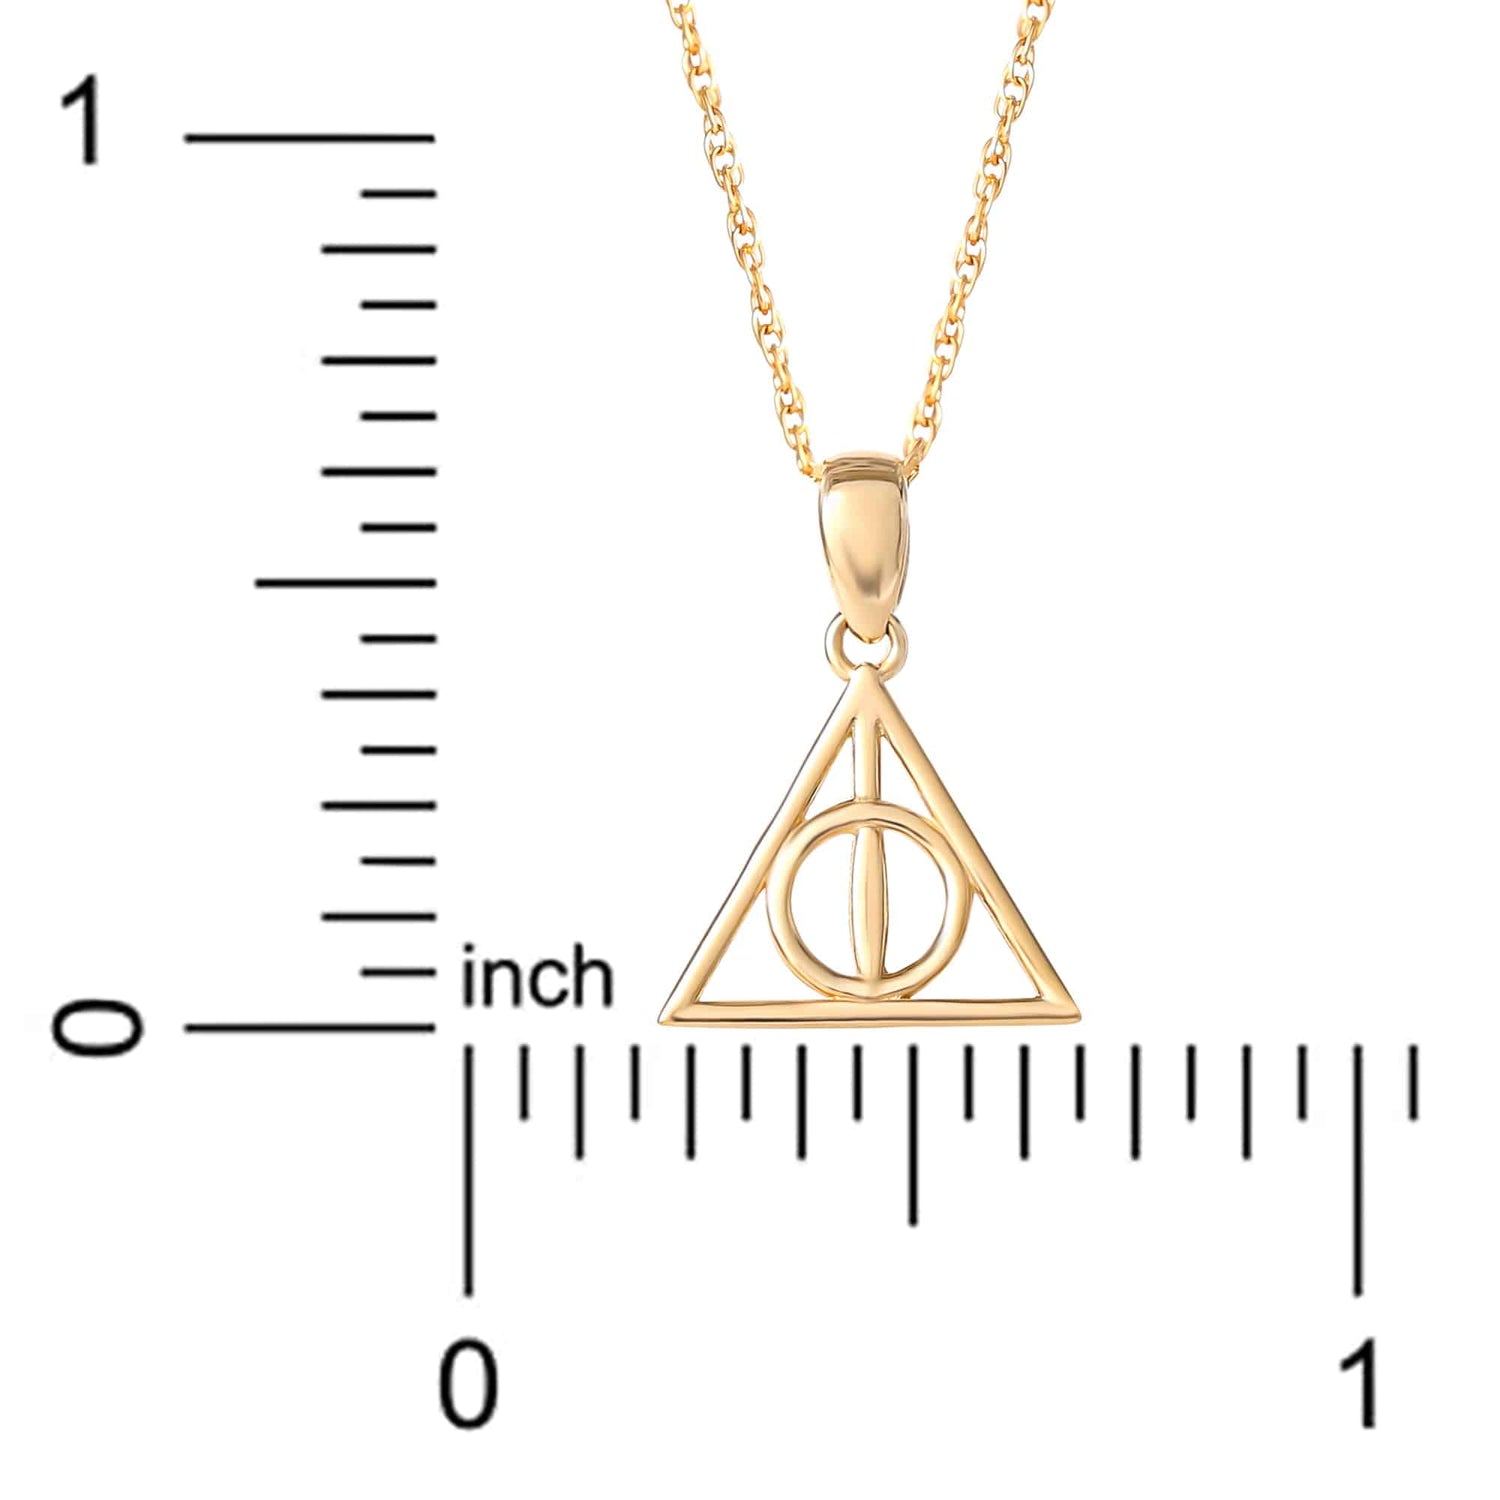 Harry Potter Deathly Hallows Pendant Necklace | Harry potter shoes, Harry  potter deathly hallows, Harry potter jewelry